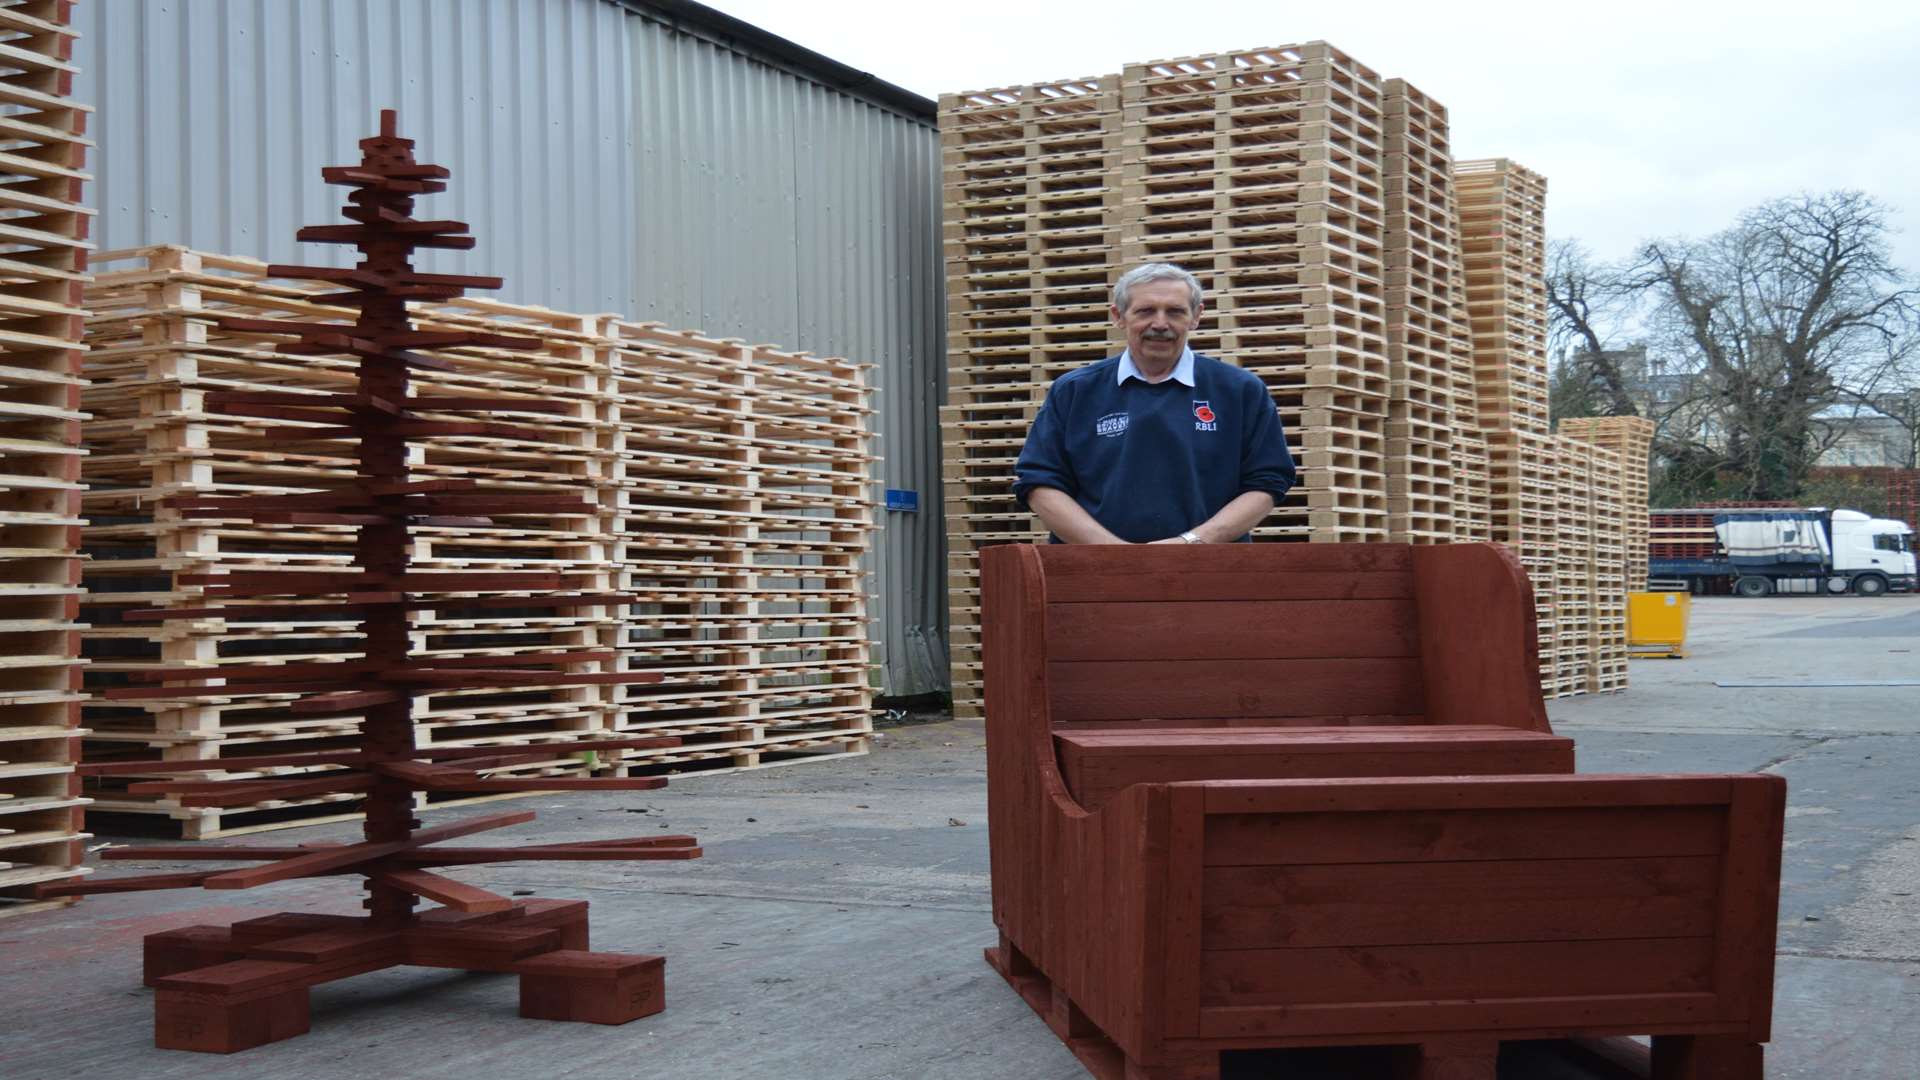 Nigel Chambers helped construct Santa's sleigh from used pallets. Here he is pictured with the sleigh and the tree he created